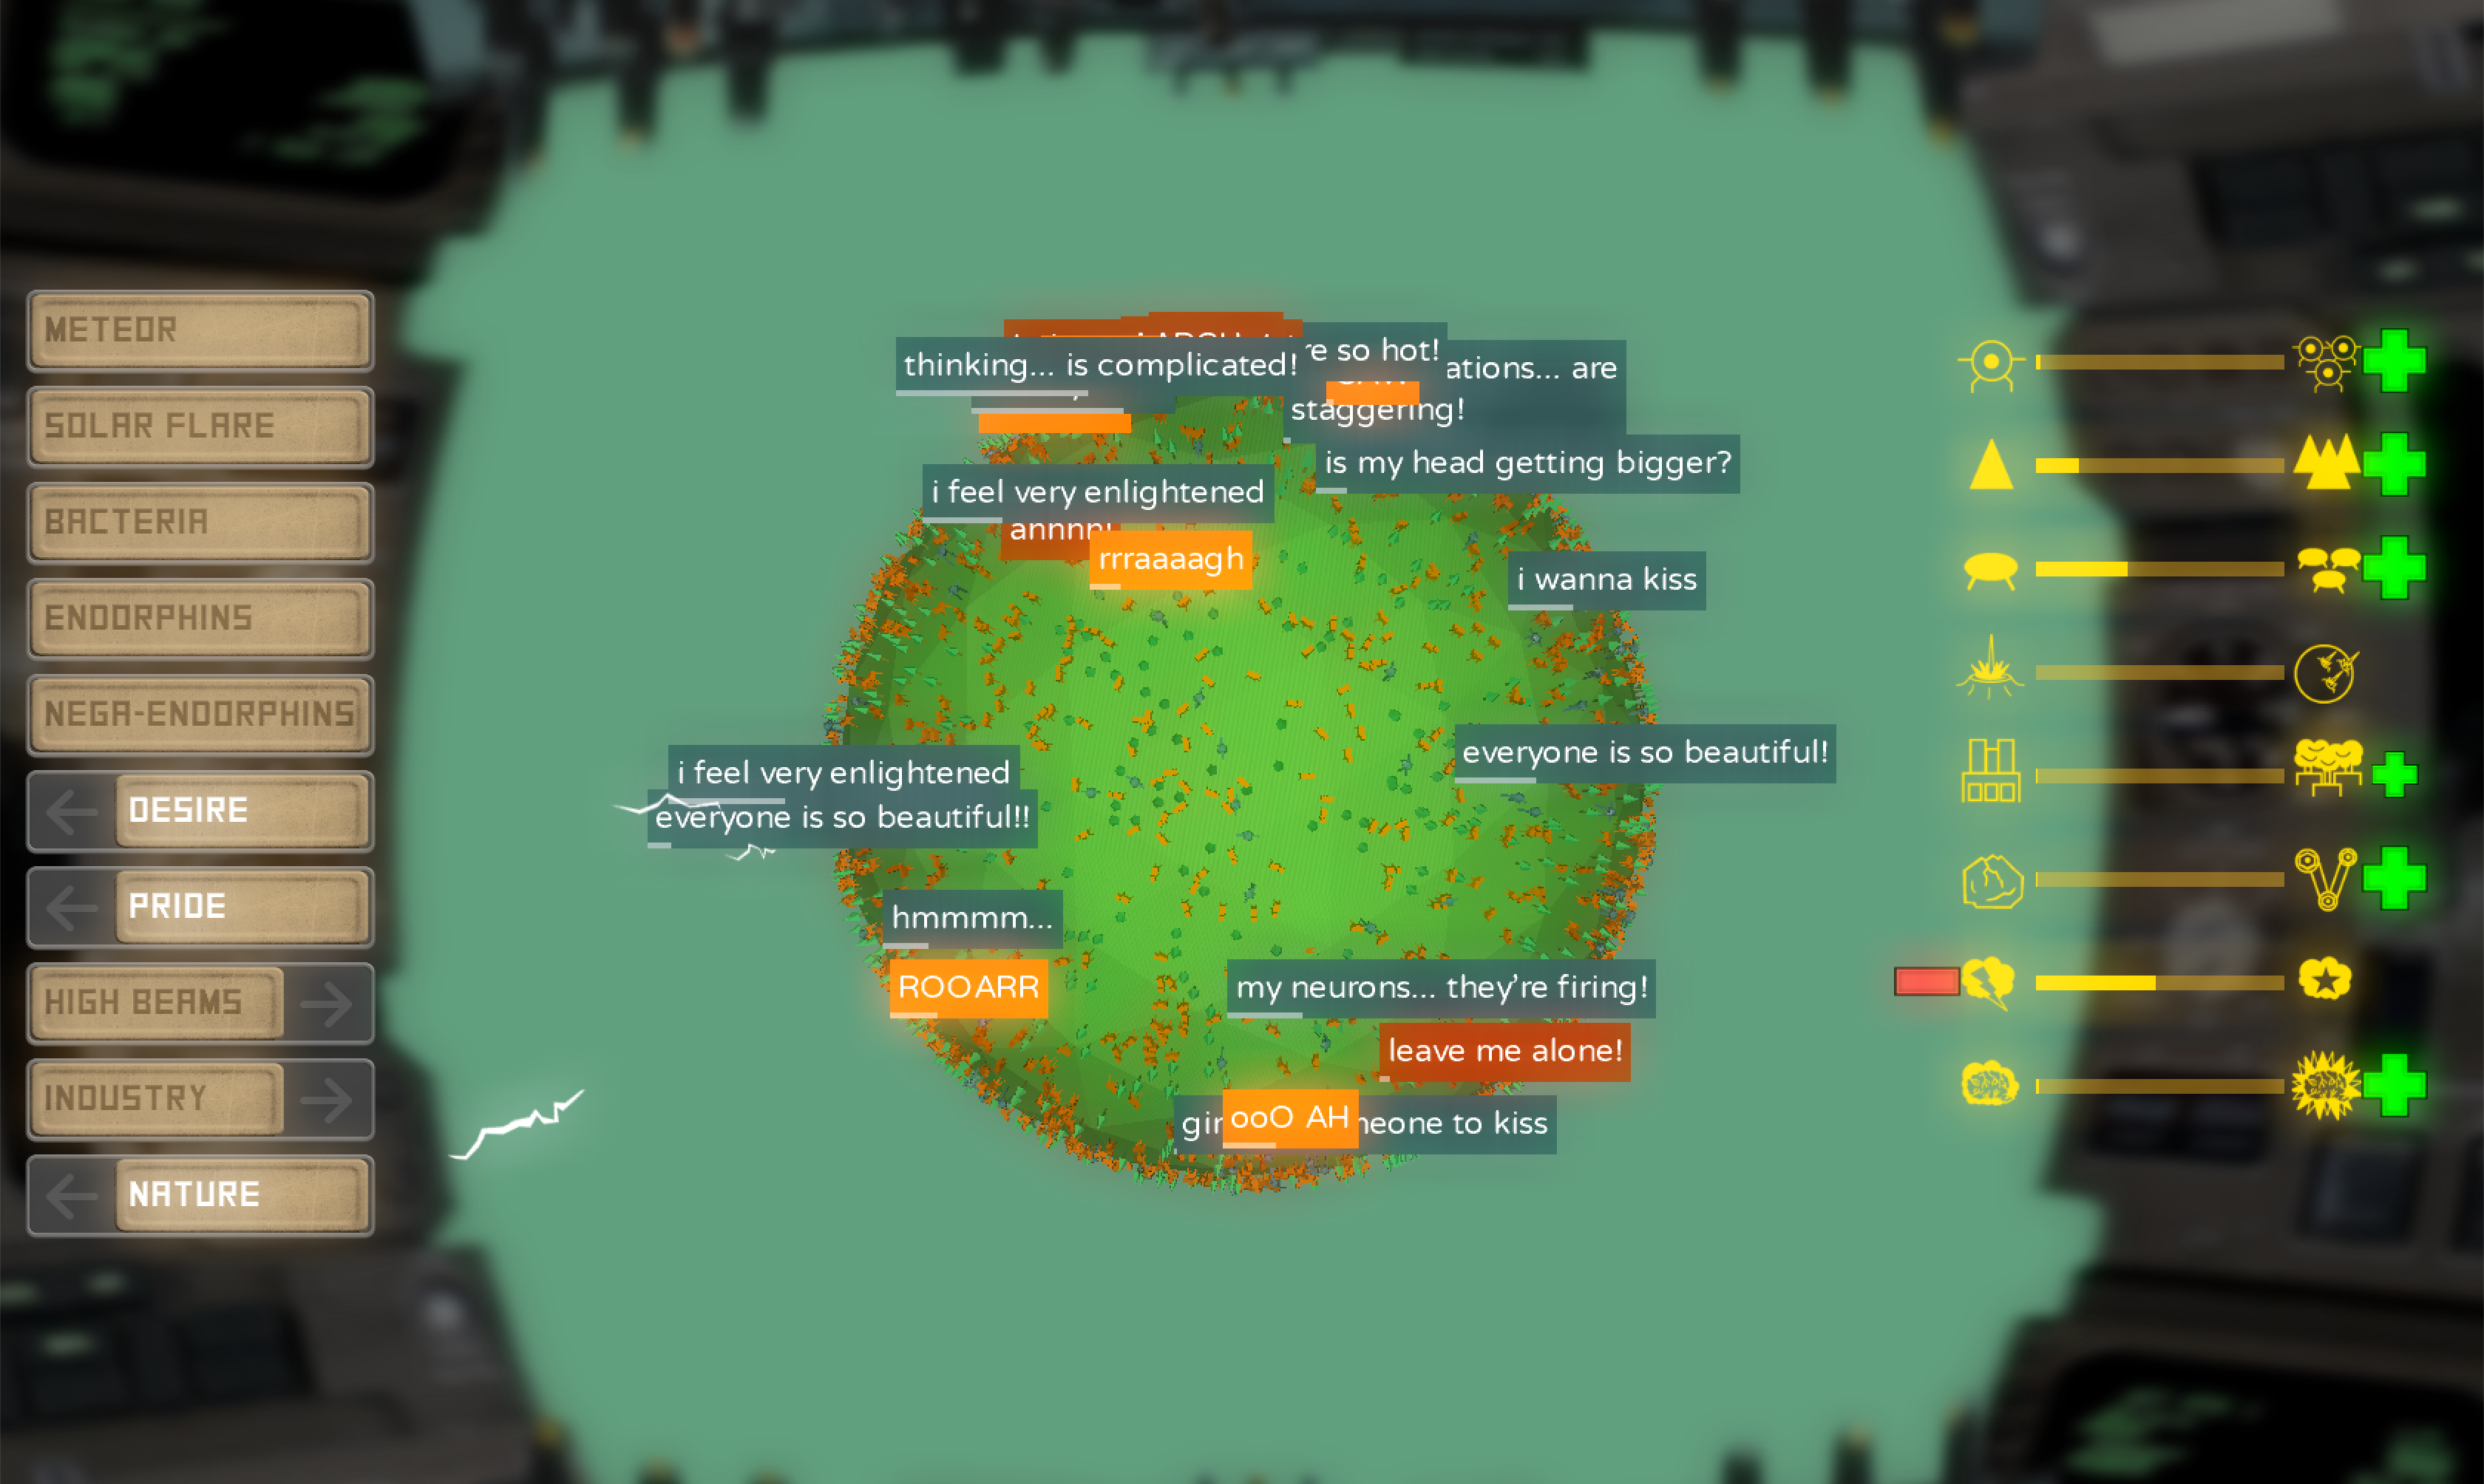 Blasting an enormous amount of input (including Desire, Pride, and Nature) at the player's pet planet in Planetfriend, with the denizens of said planet reacting with overwhelming verbosity.